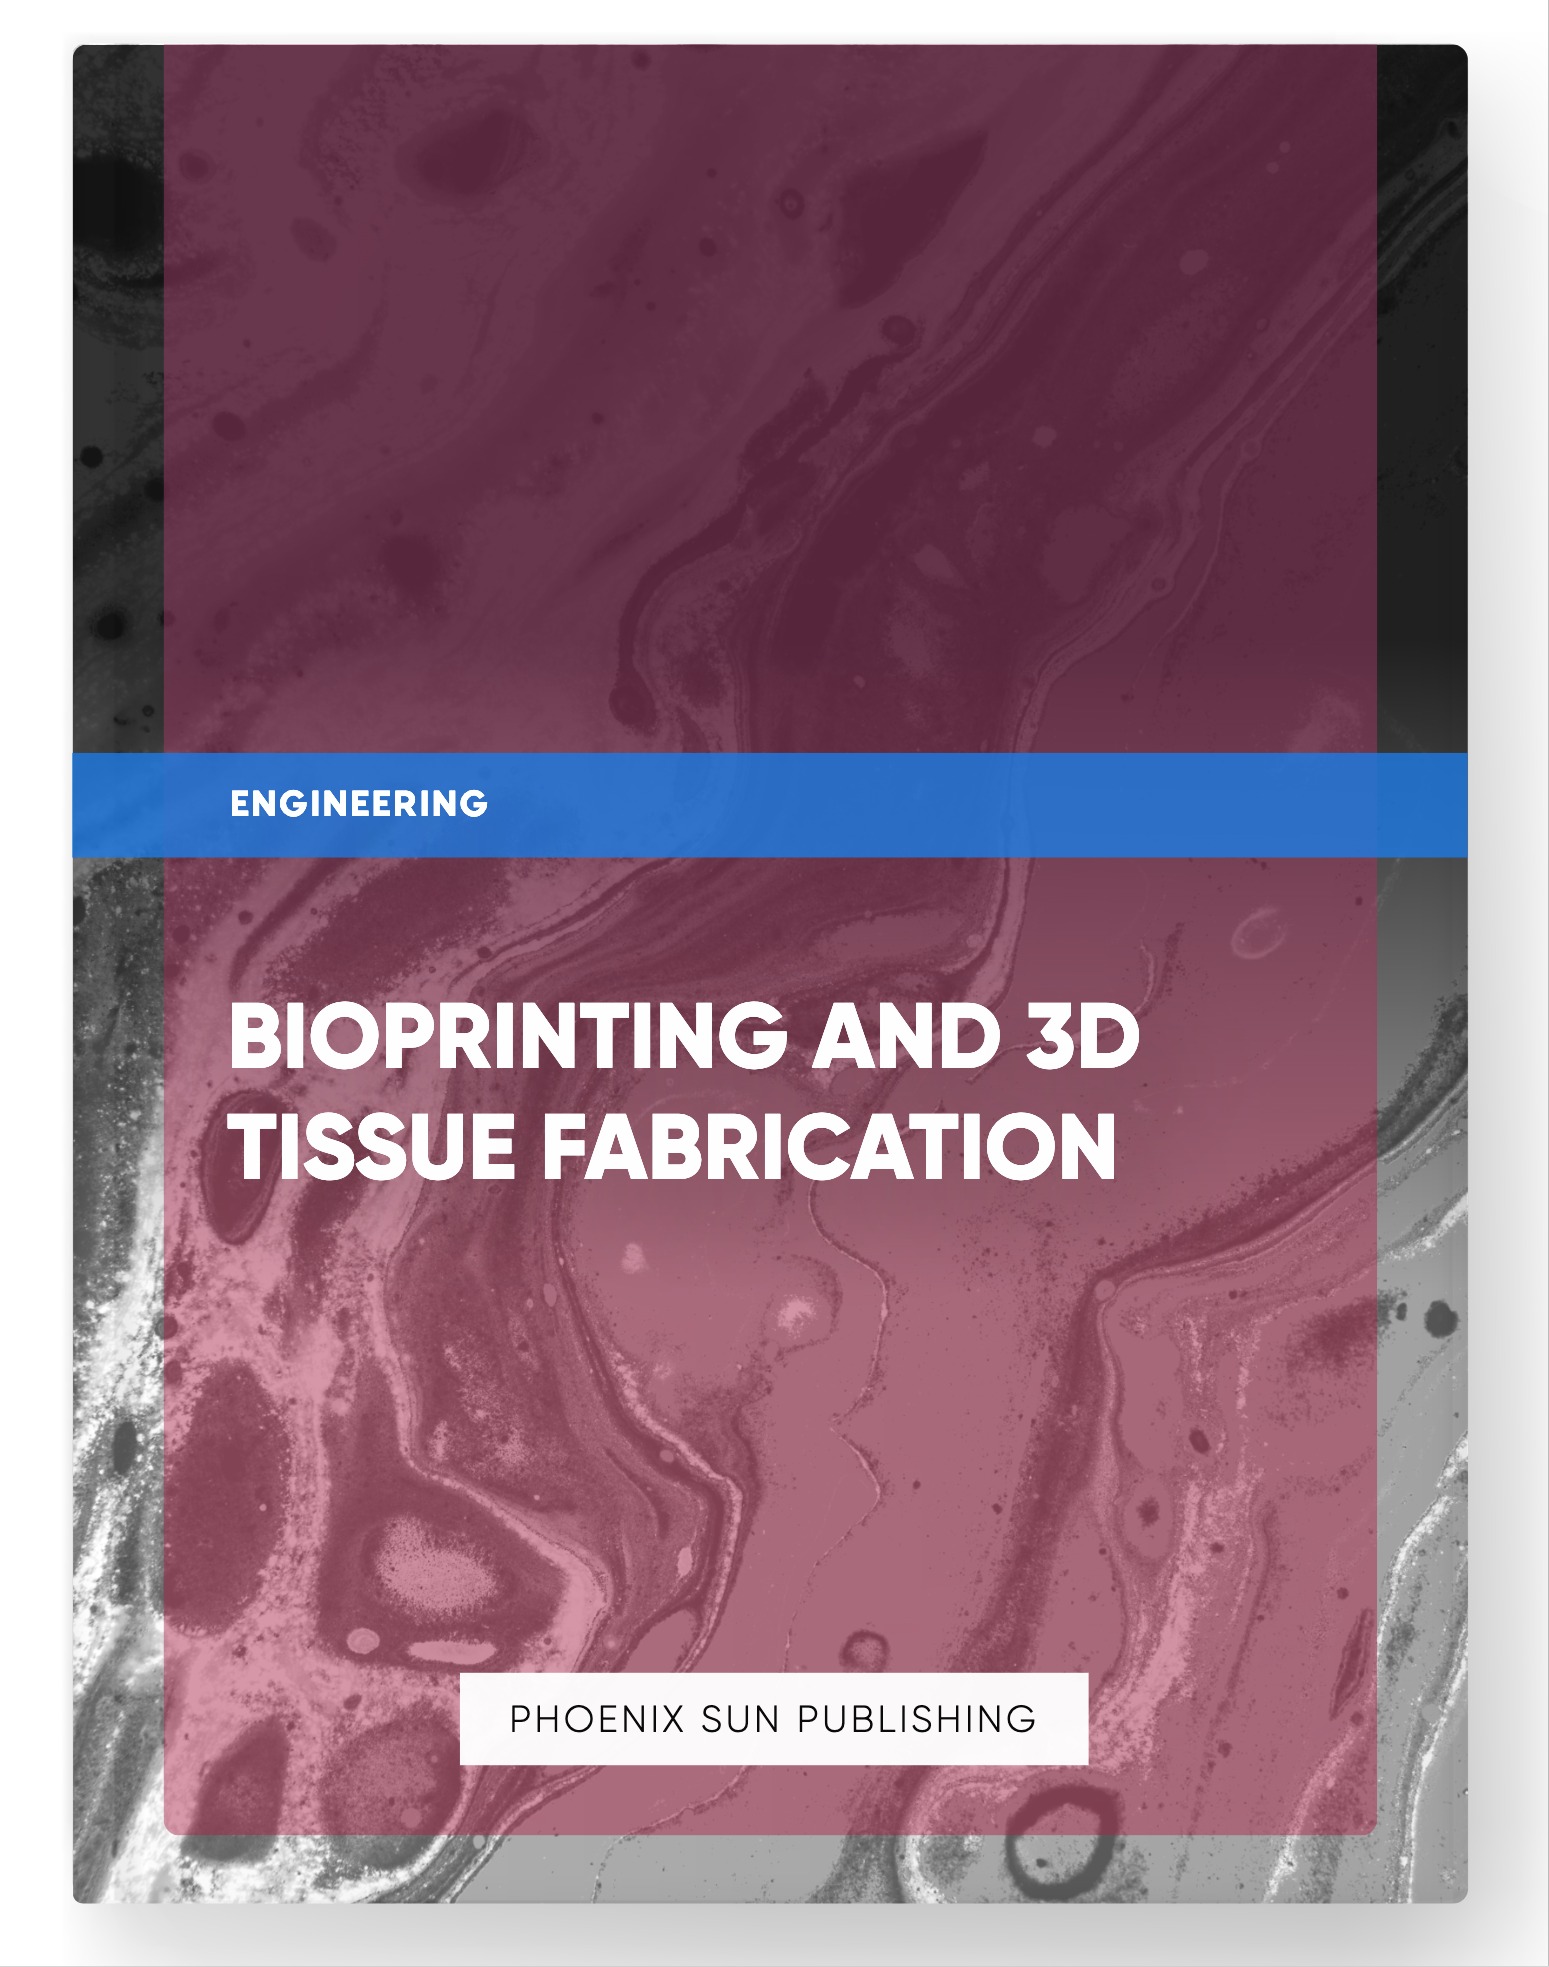 Bioprinting and 3D Tissue Fabrication